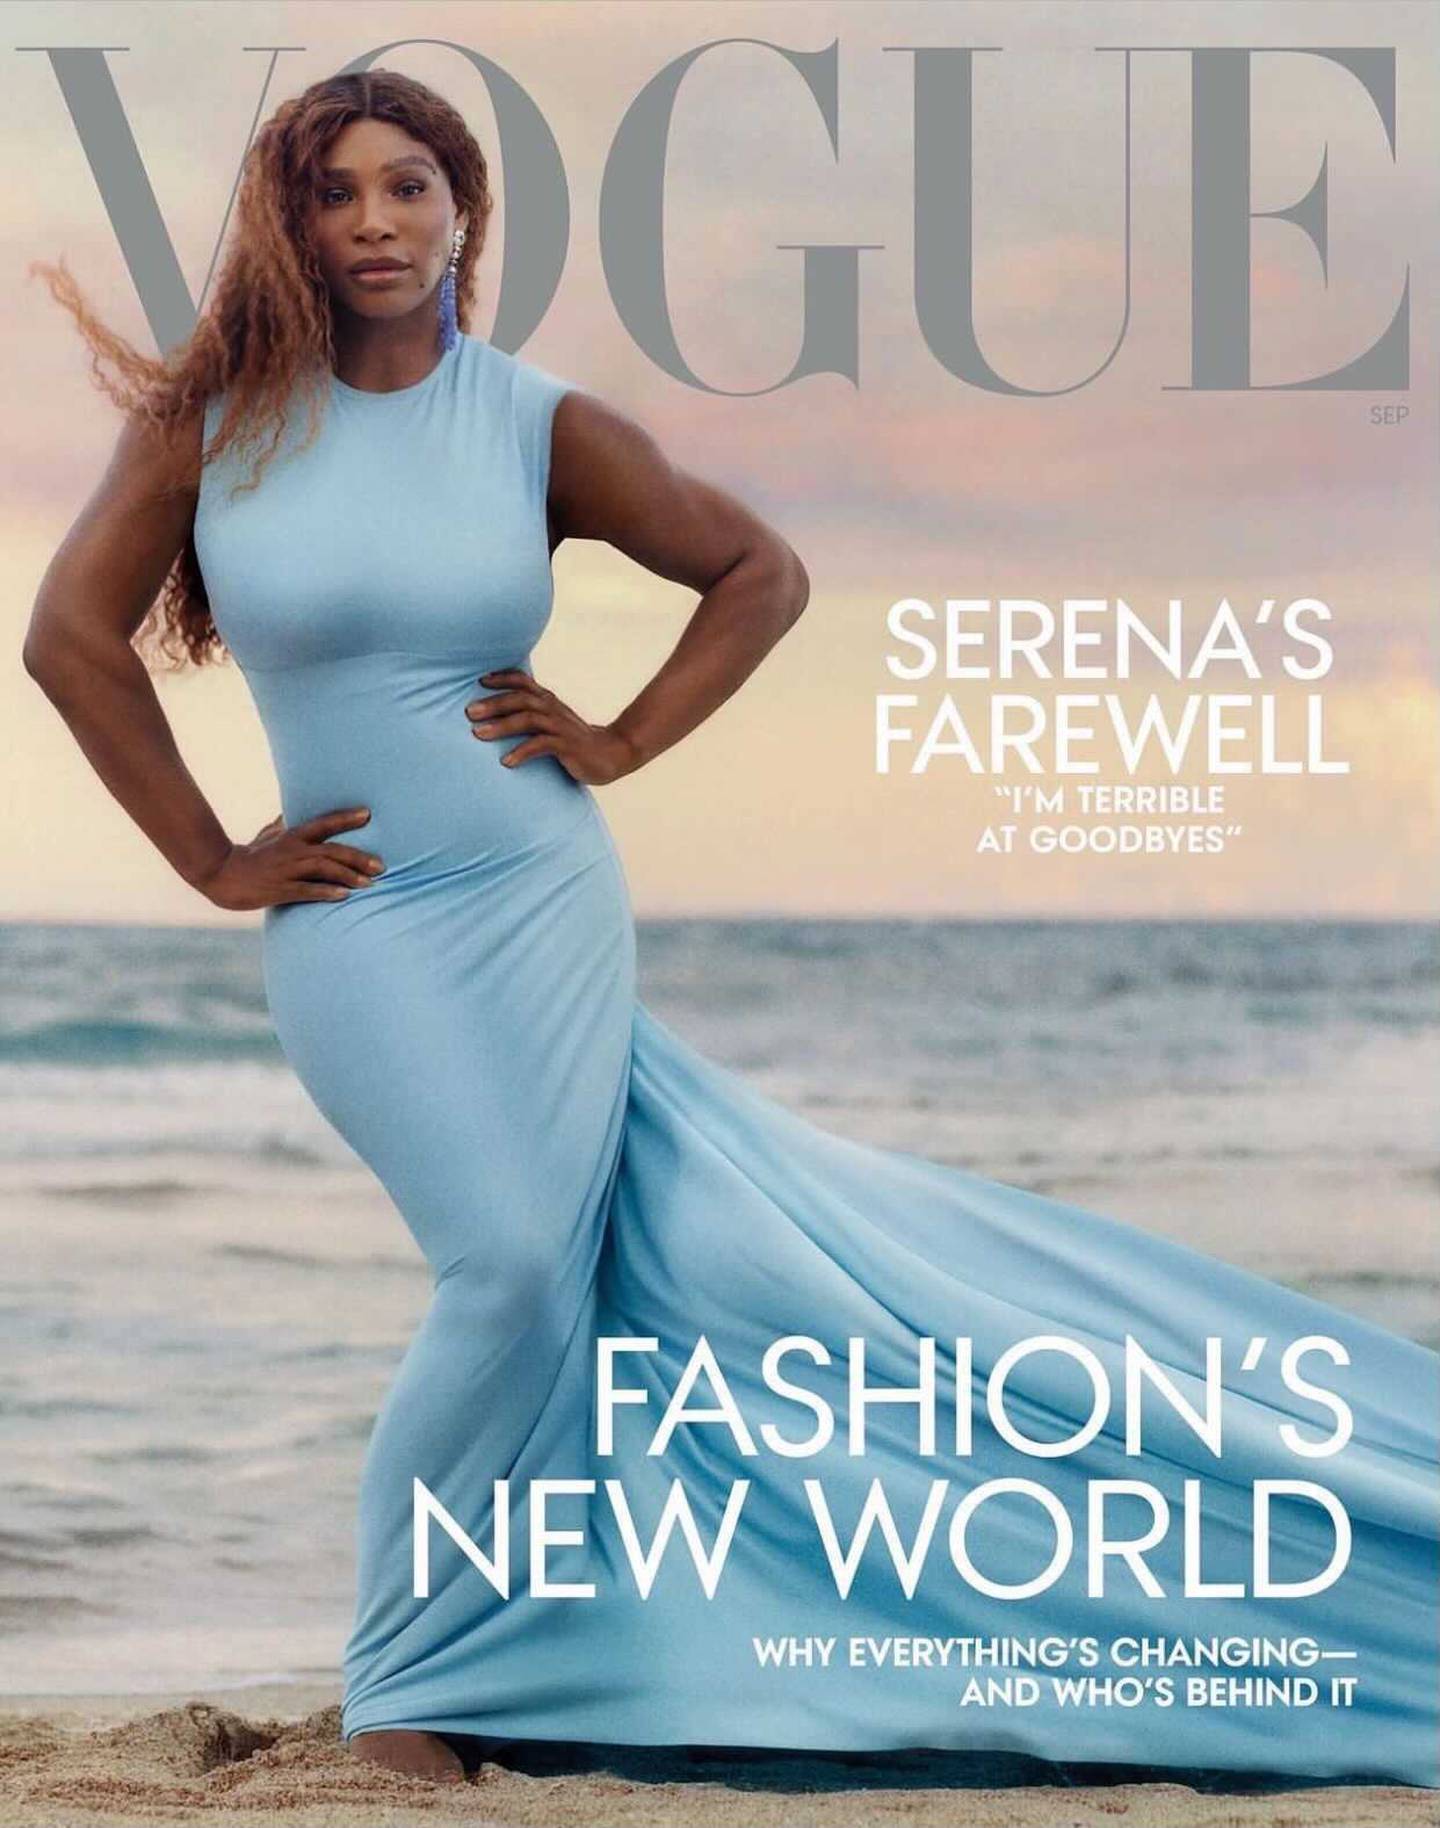 Serena Williams stars on the front cover of Vogue's September 2022 issue.